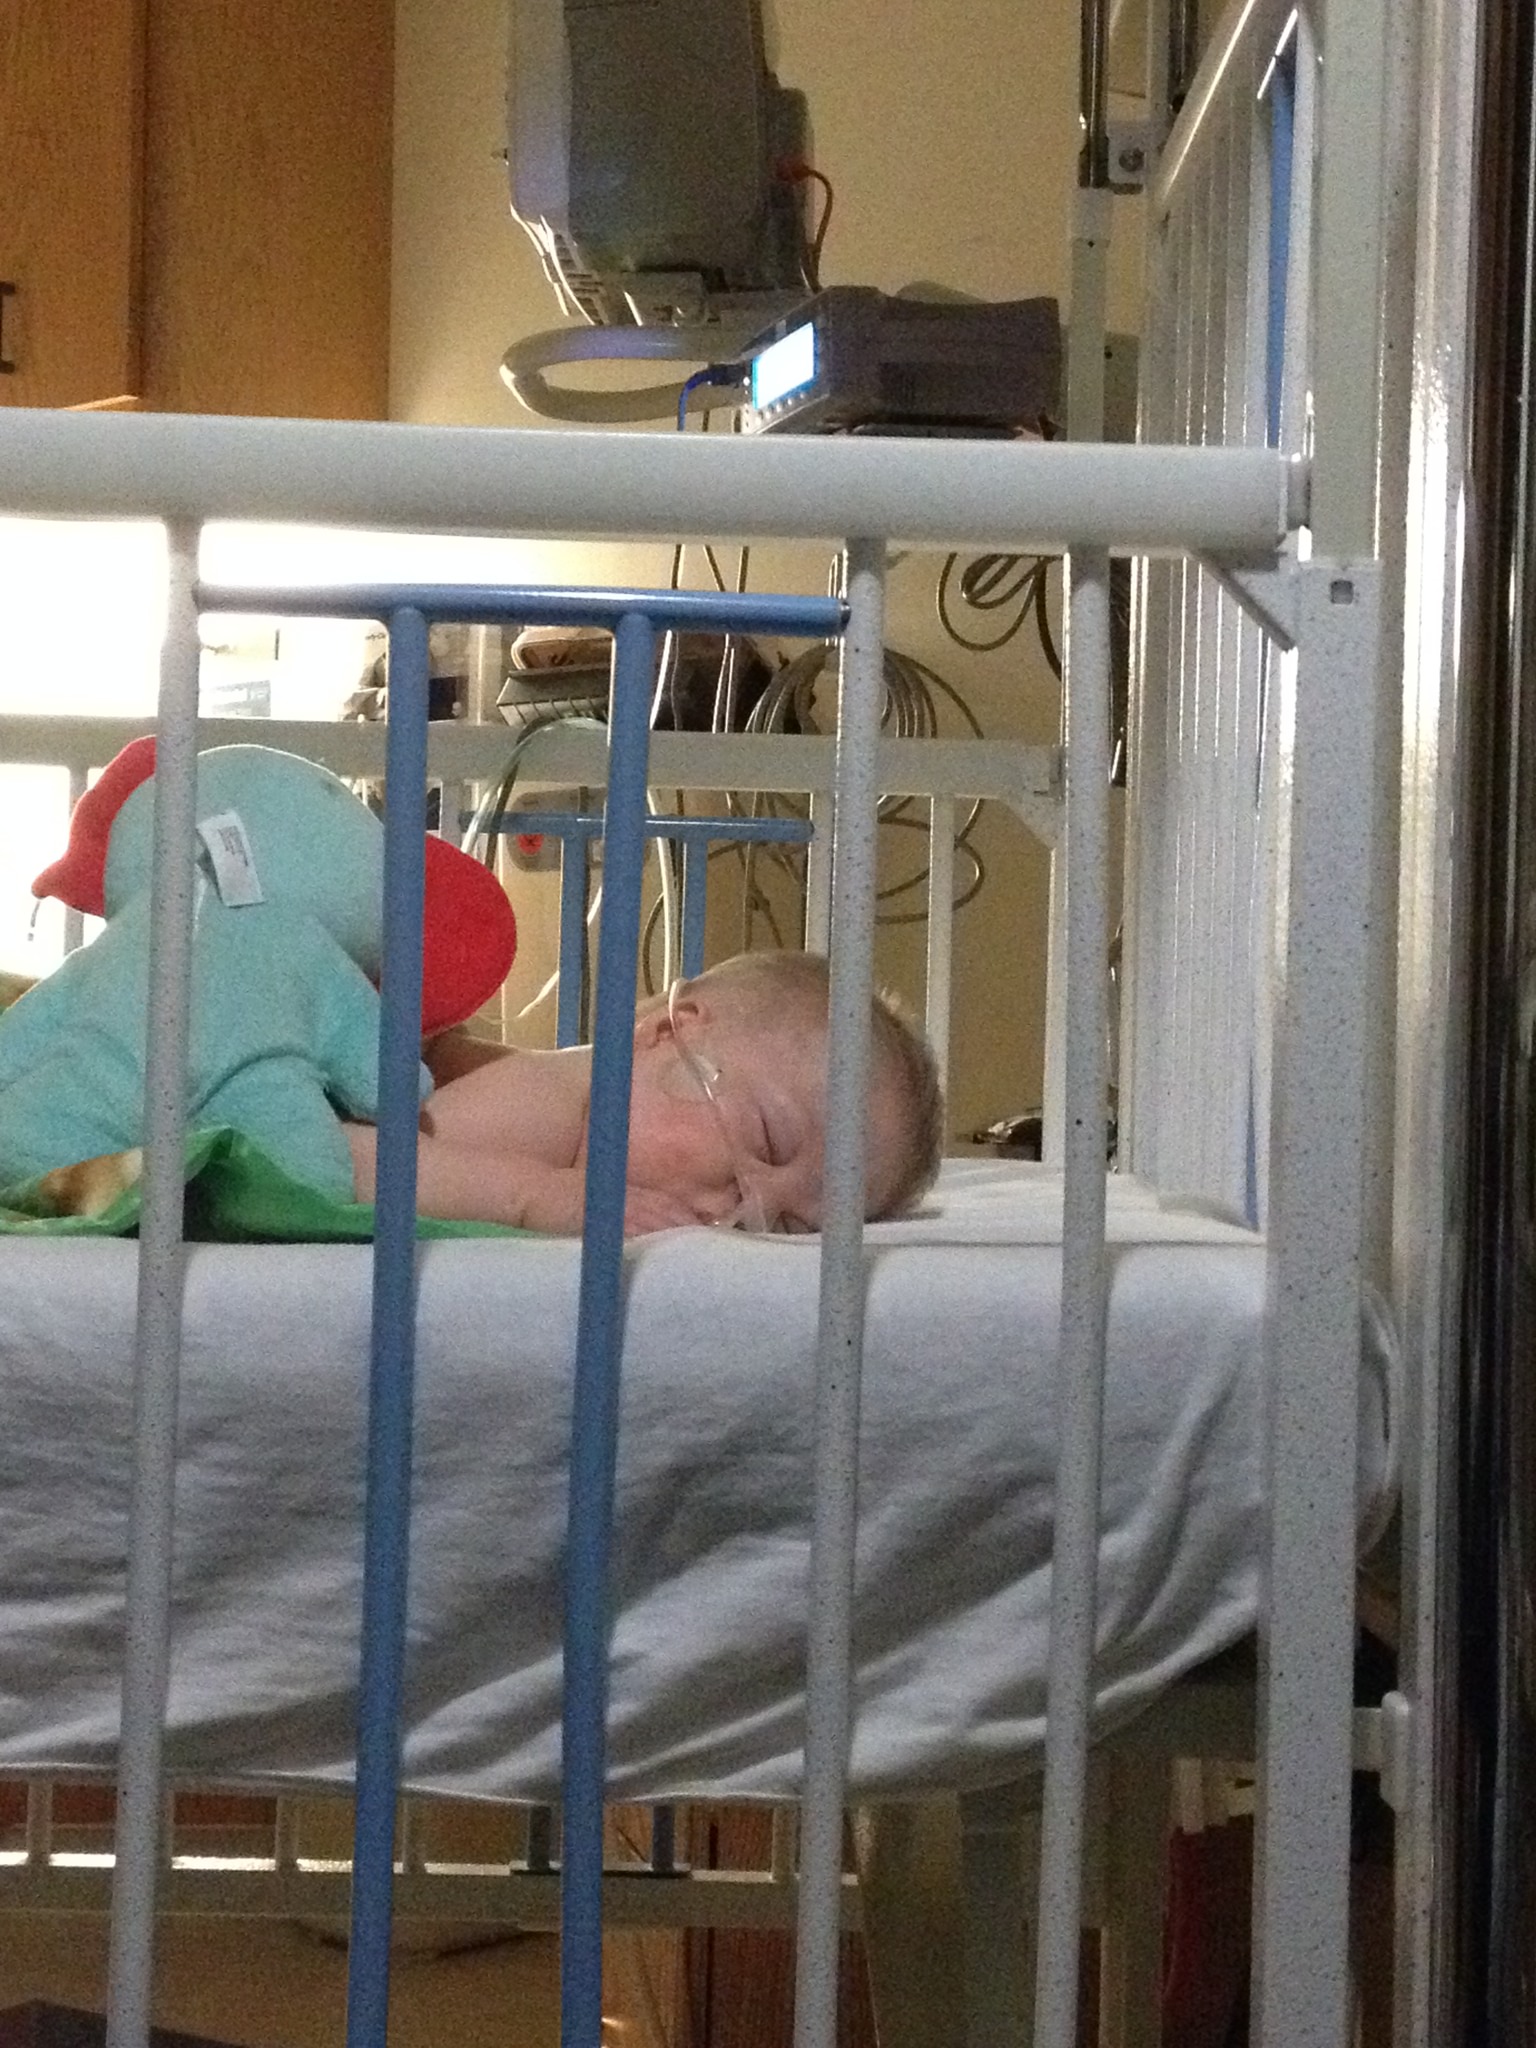 Baby Gabryel hooked up to medical equipment and snuggled up to Bruce the stuffie